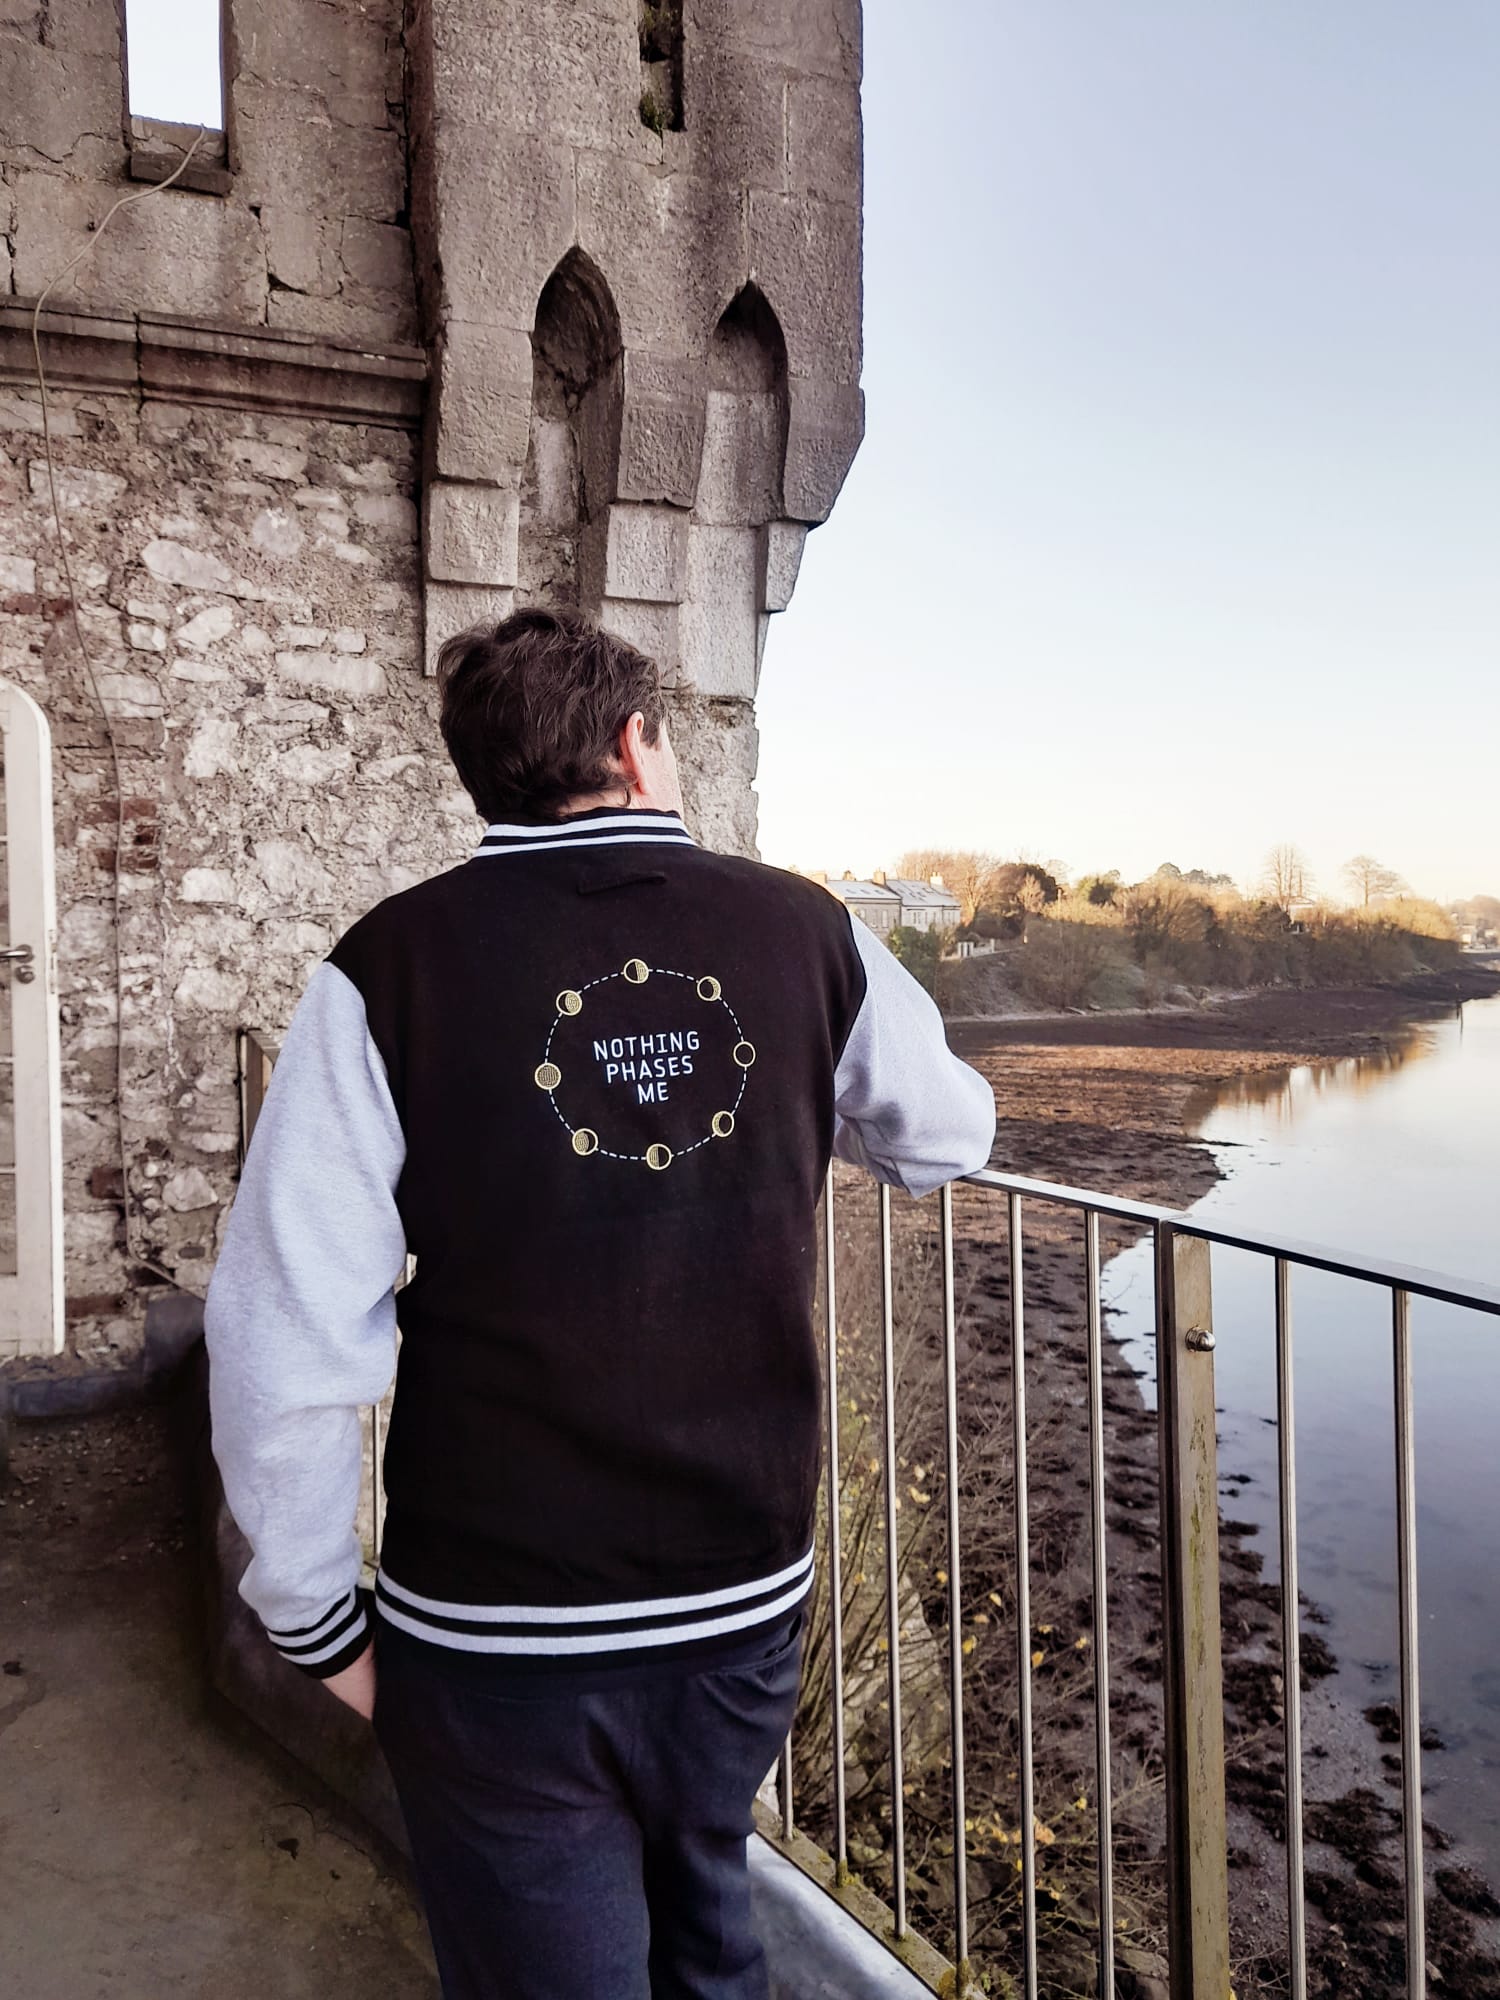 A man wearing a varsity style jacket with his back to camera. The phrase "Nothing phases me" is printed on the back of it along with a graphic displaying the phases of the moon. He is standing in front of a tower.